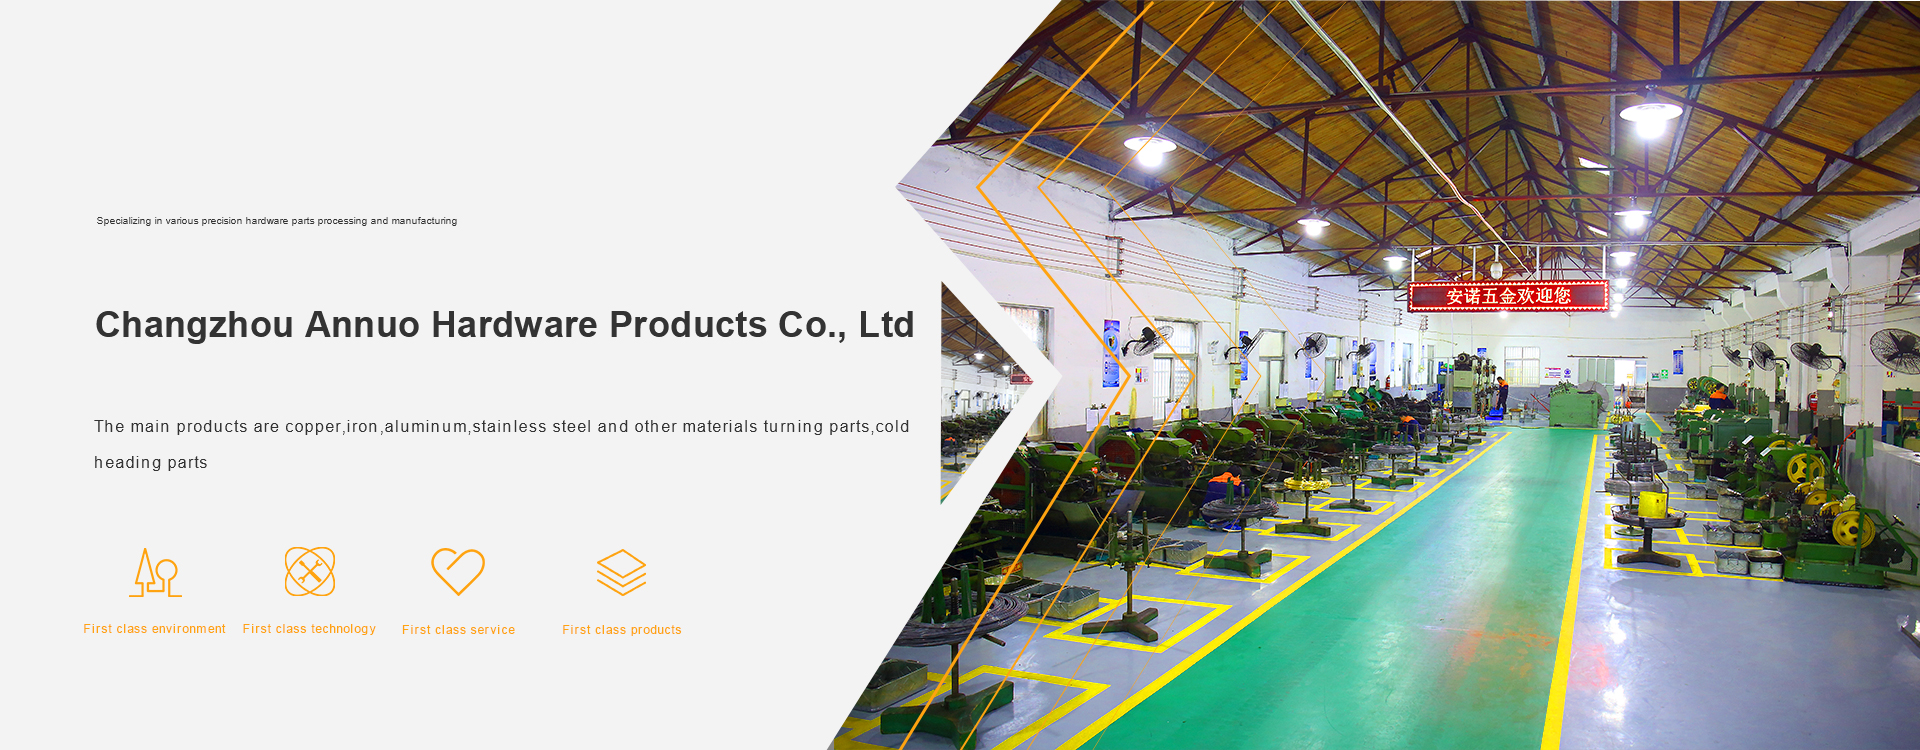 Changzhou Annuo Hardware Products Co., Ltd